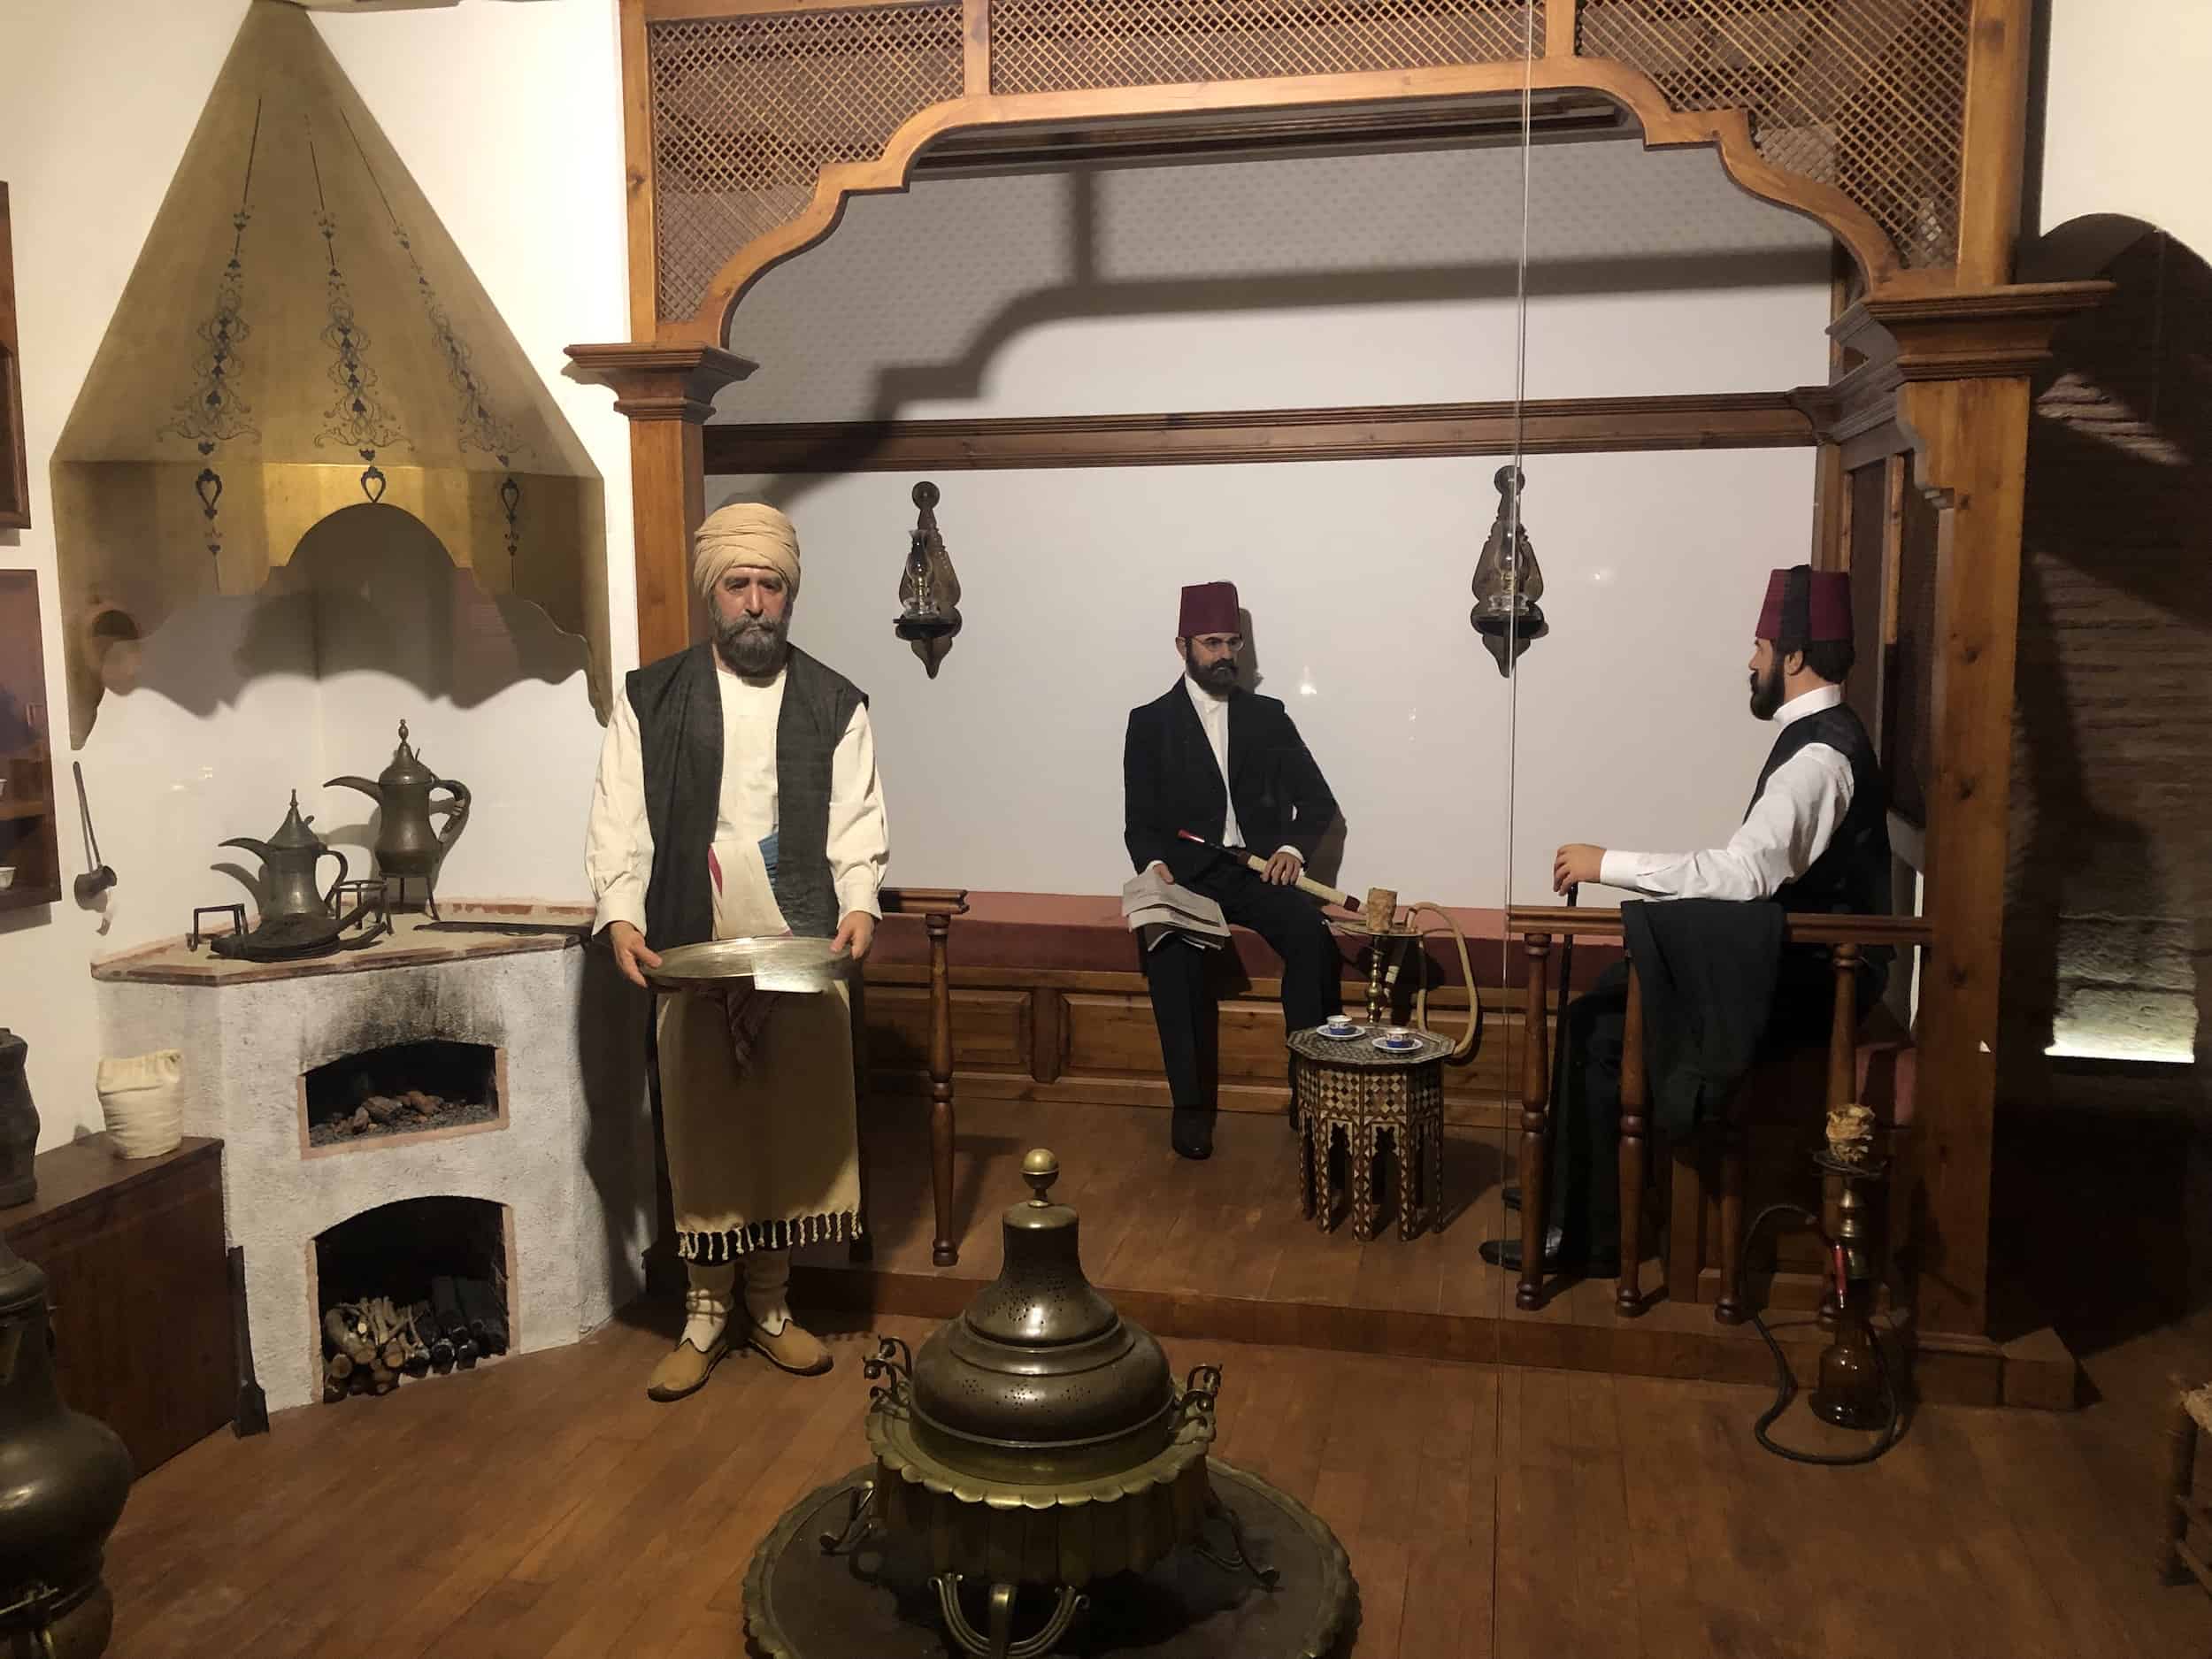 Coffee house in the ethnographic collection at the Museum of Turkish and Islamic Arts in Istanbul, Turkey